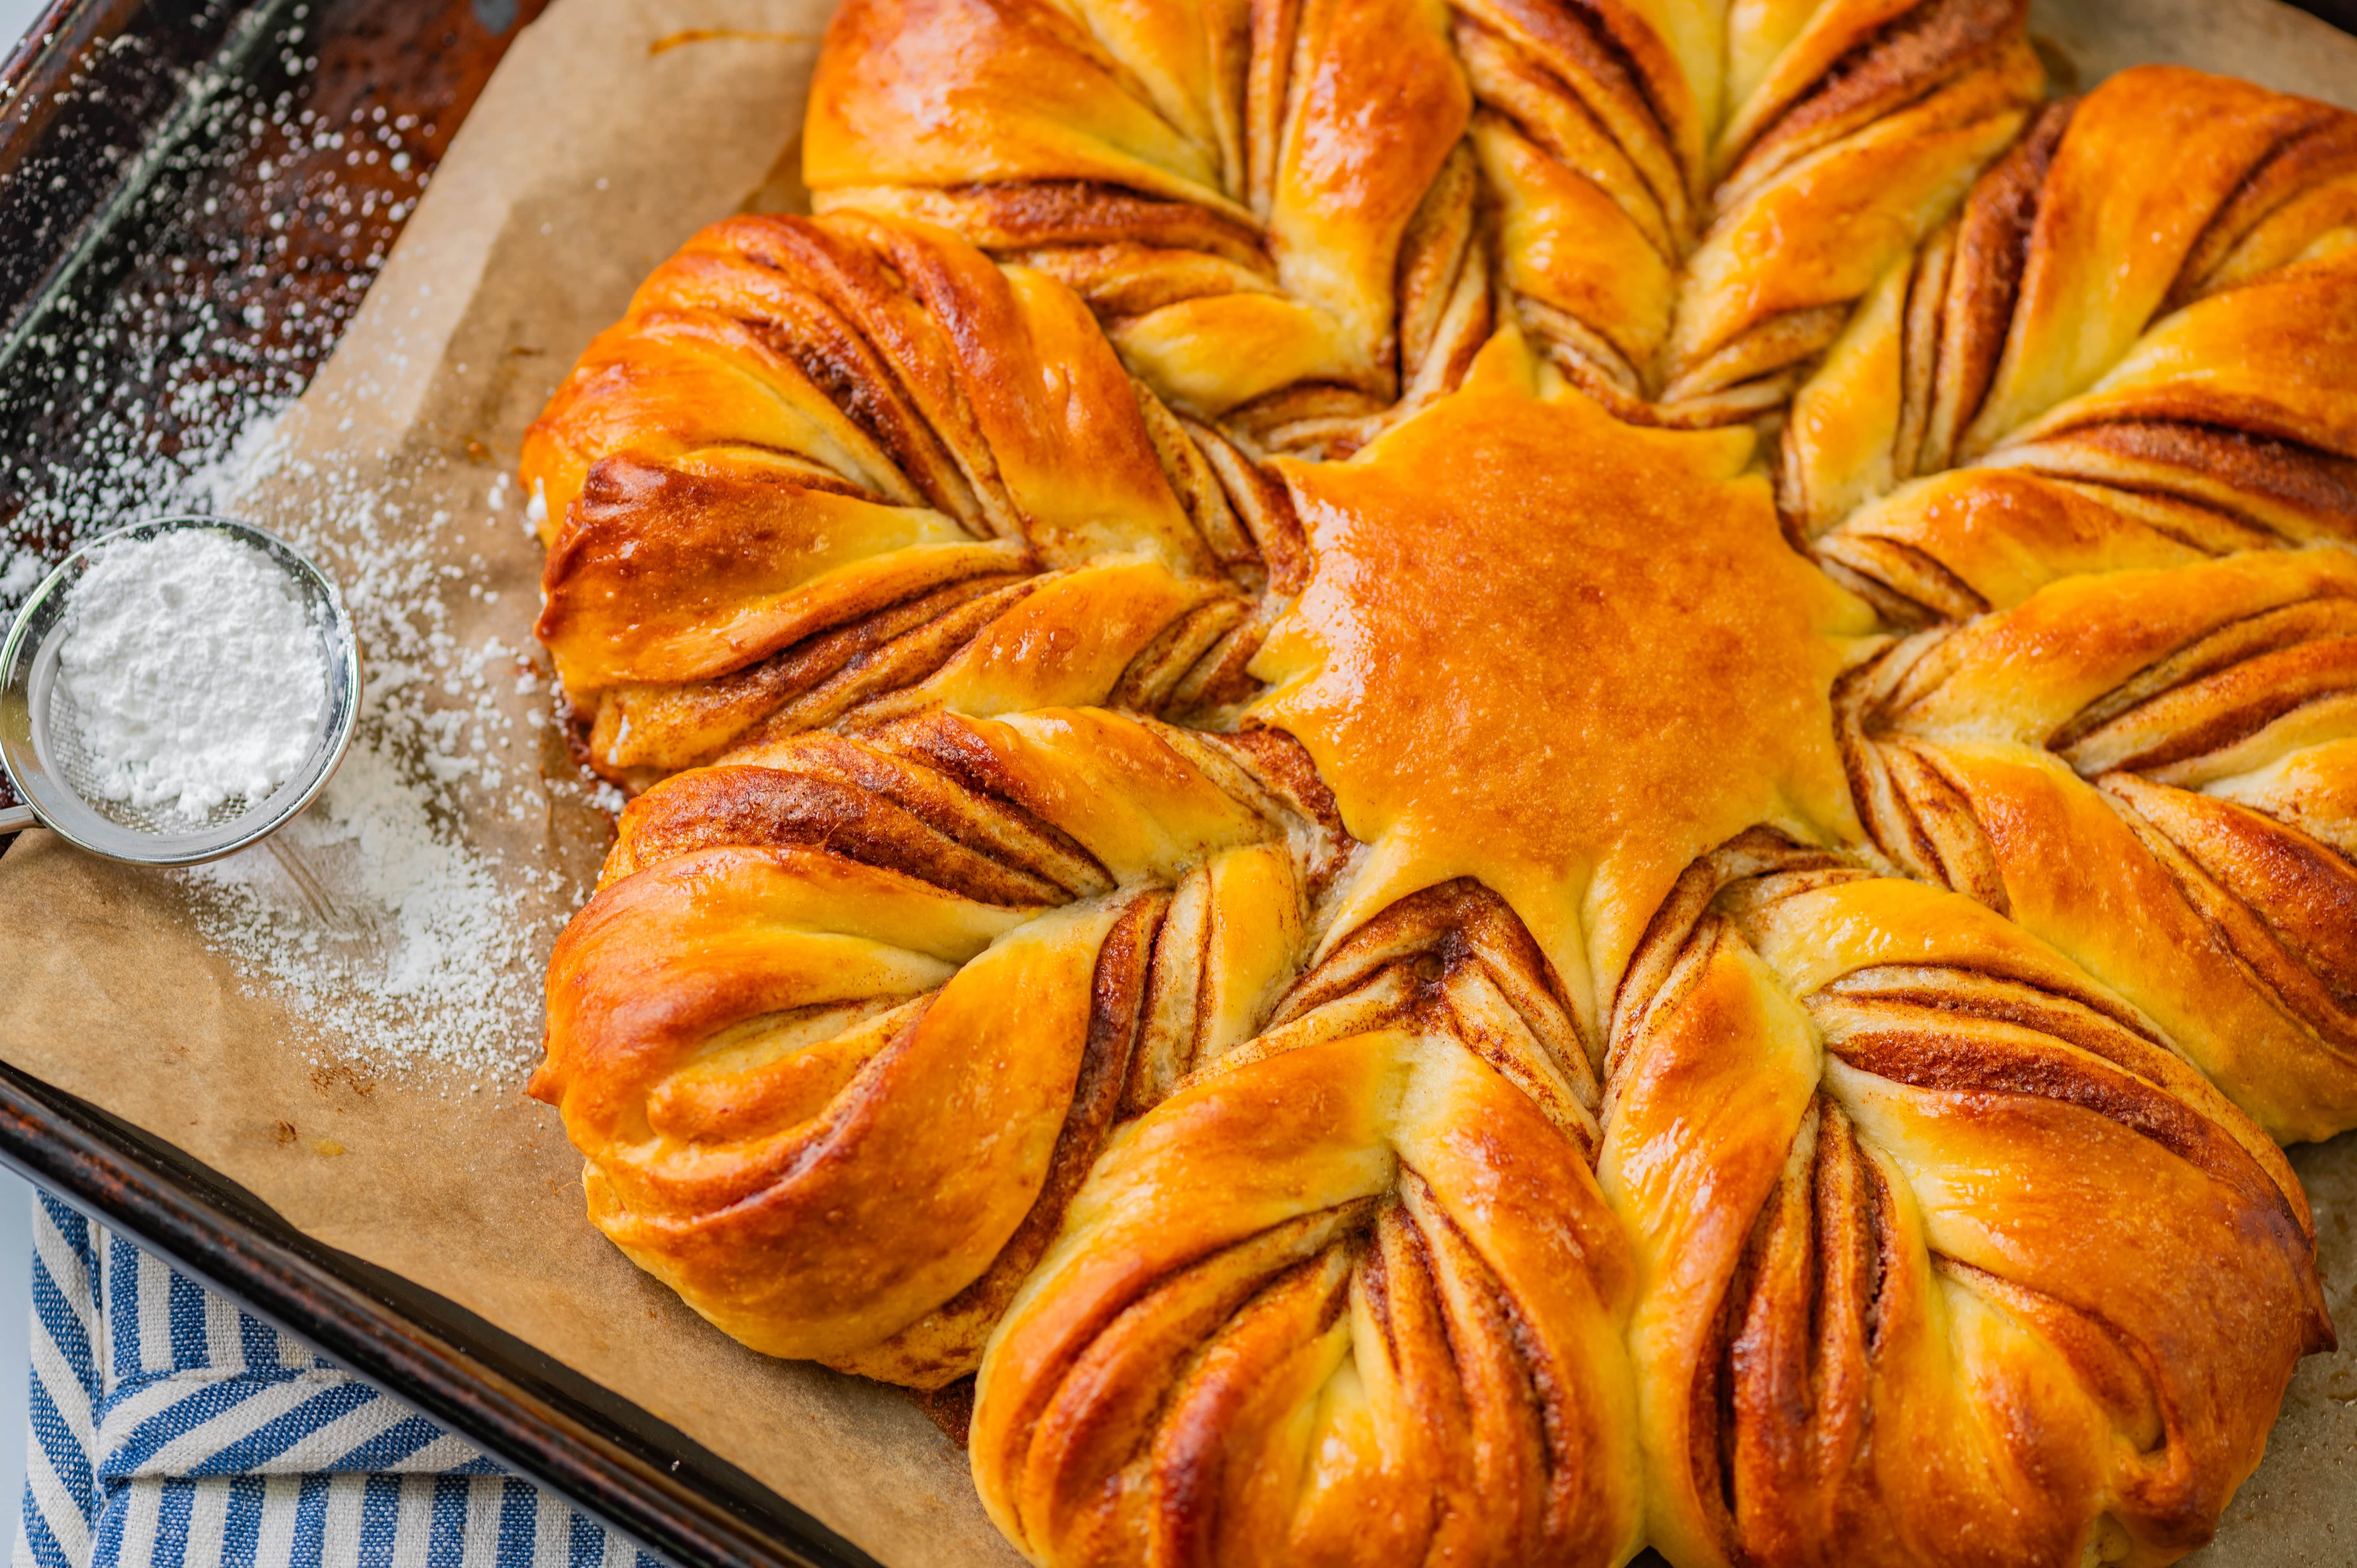 Baked, twisted Star Bread on a pan with a sifter of powdered sugar next to it